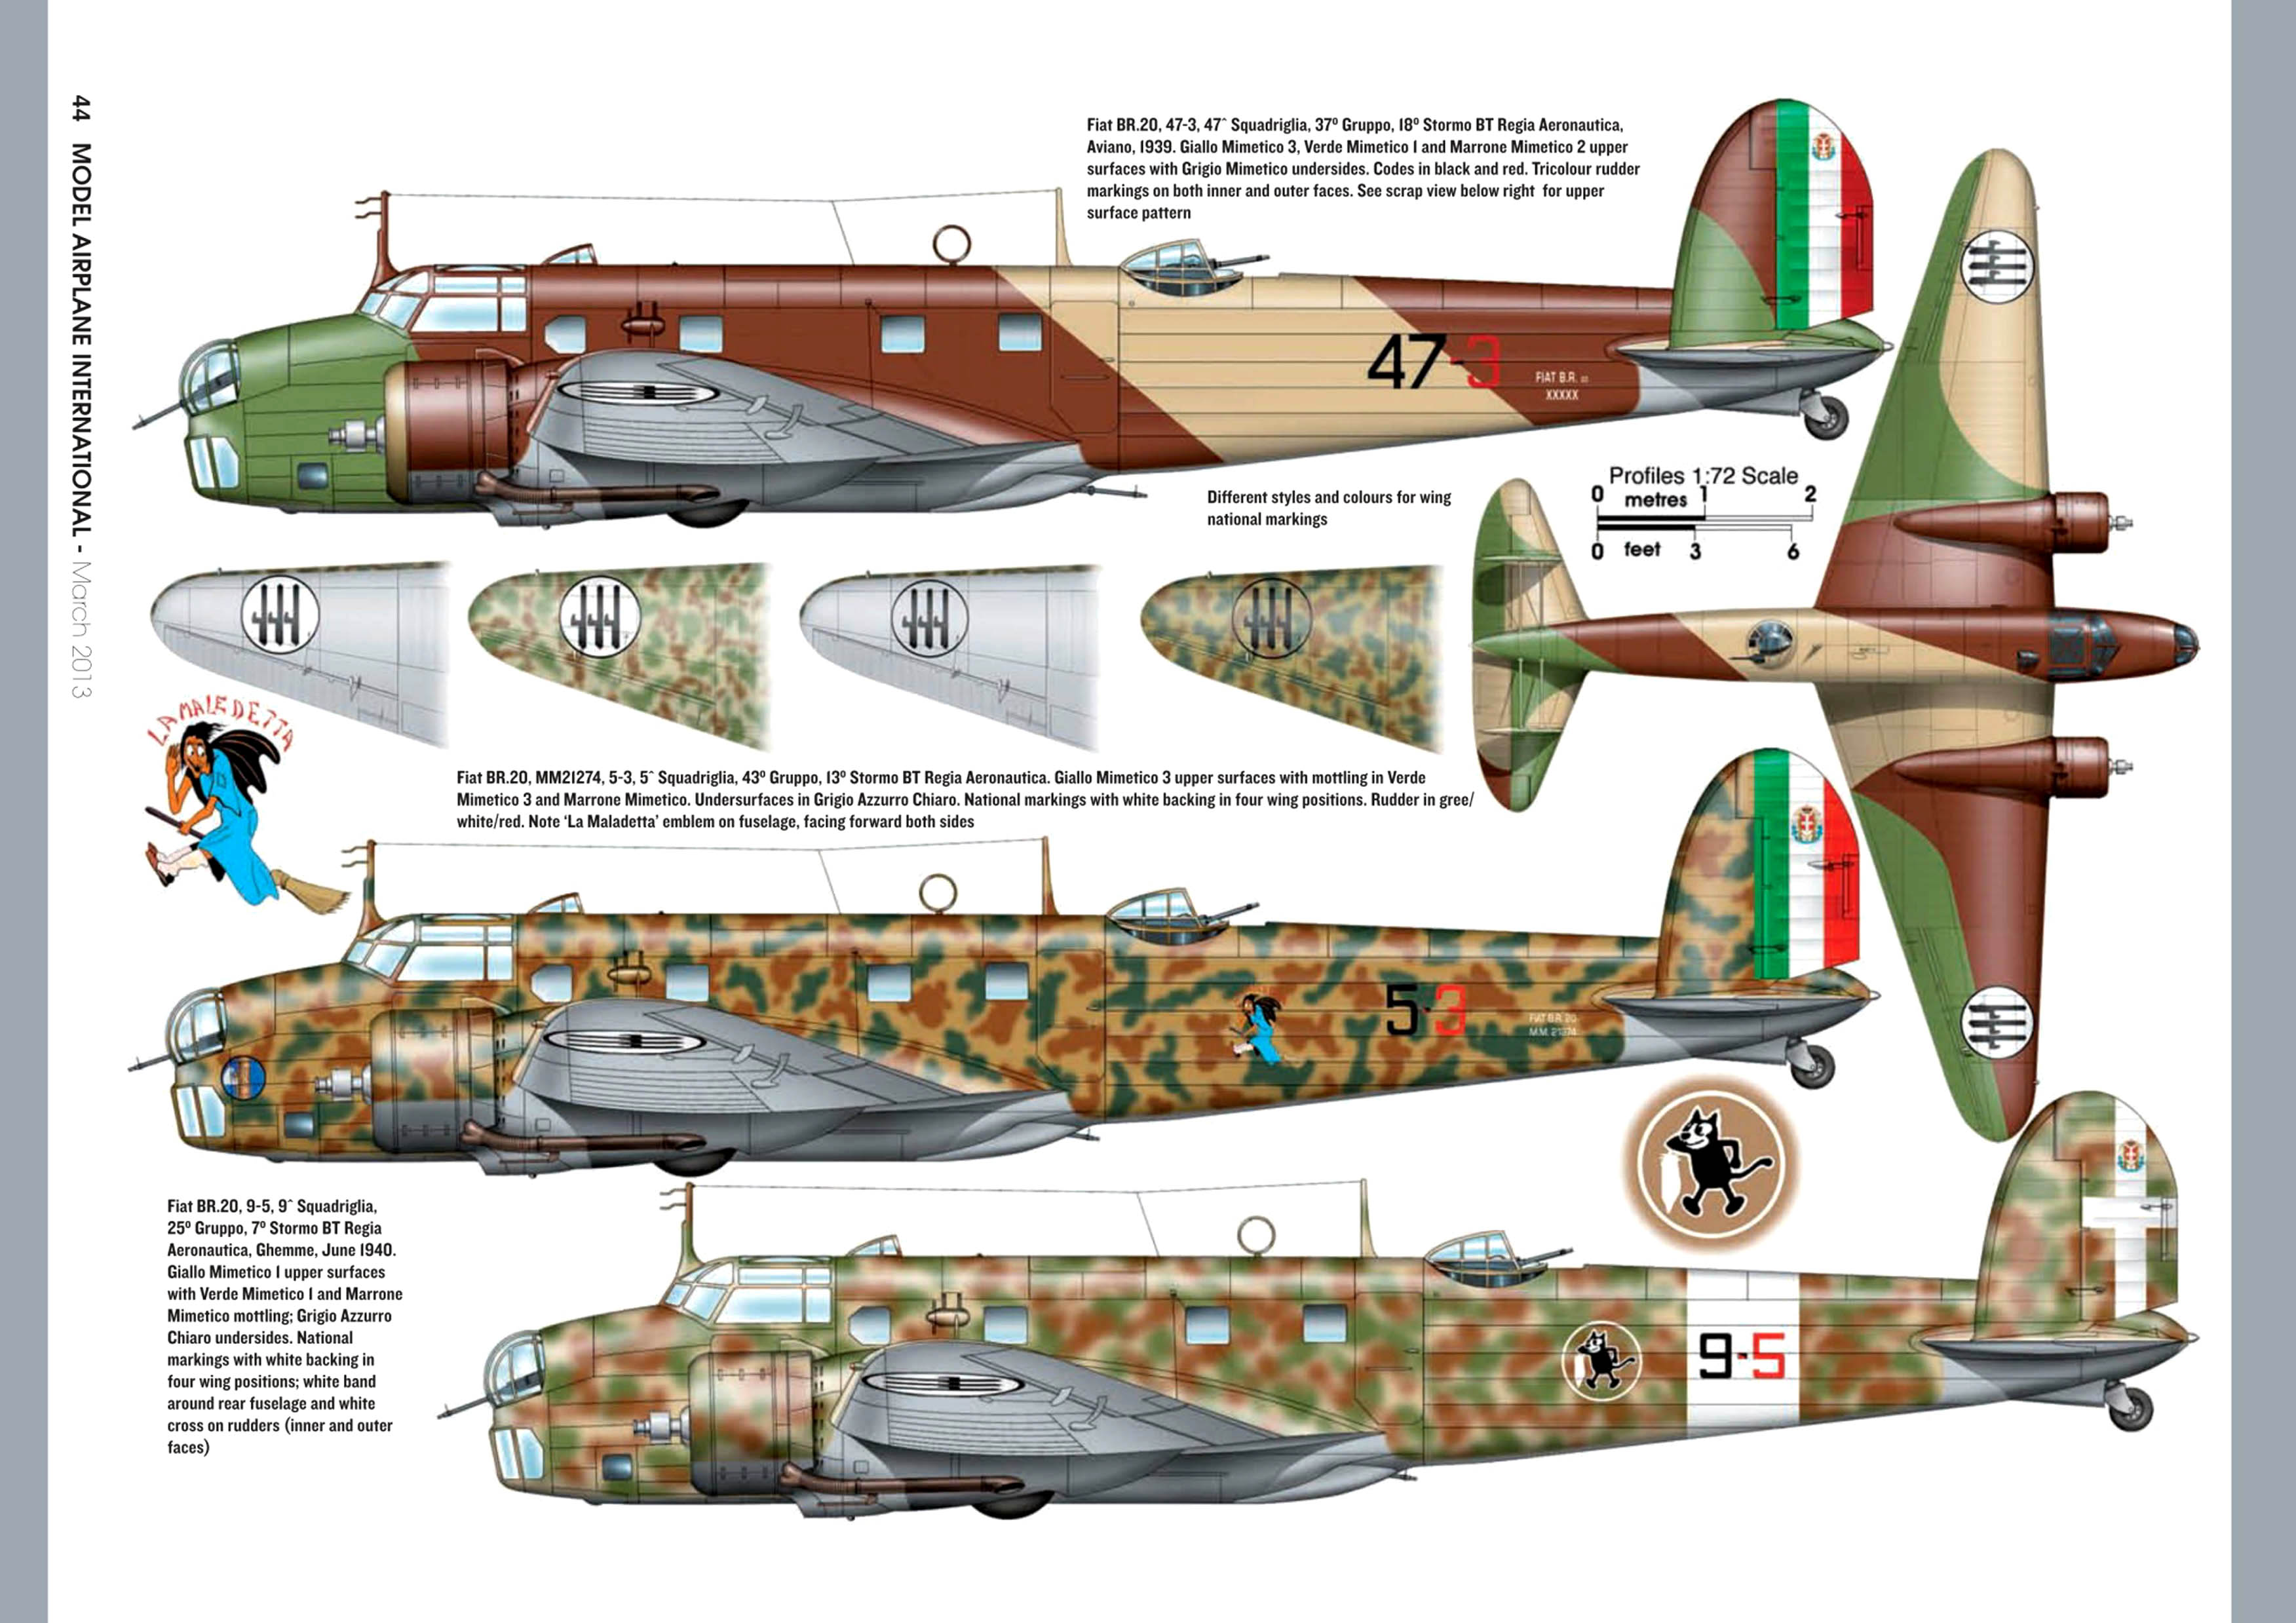 Fiat BR.20 Cicogna profiles by Model Airplane International no 93 Mar 2013 page 44